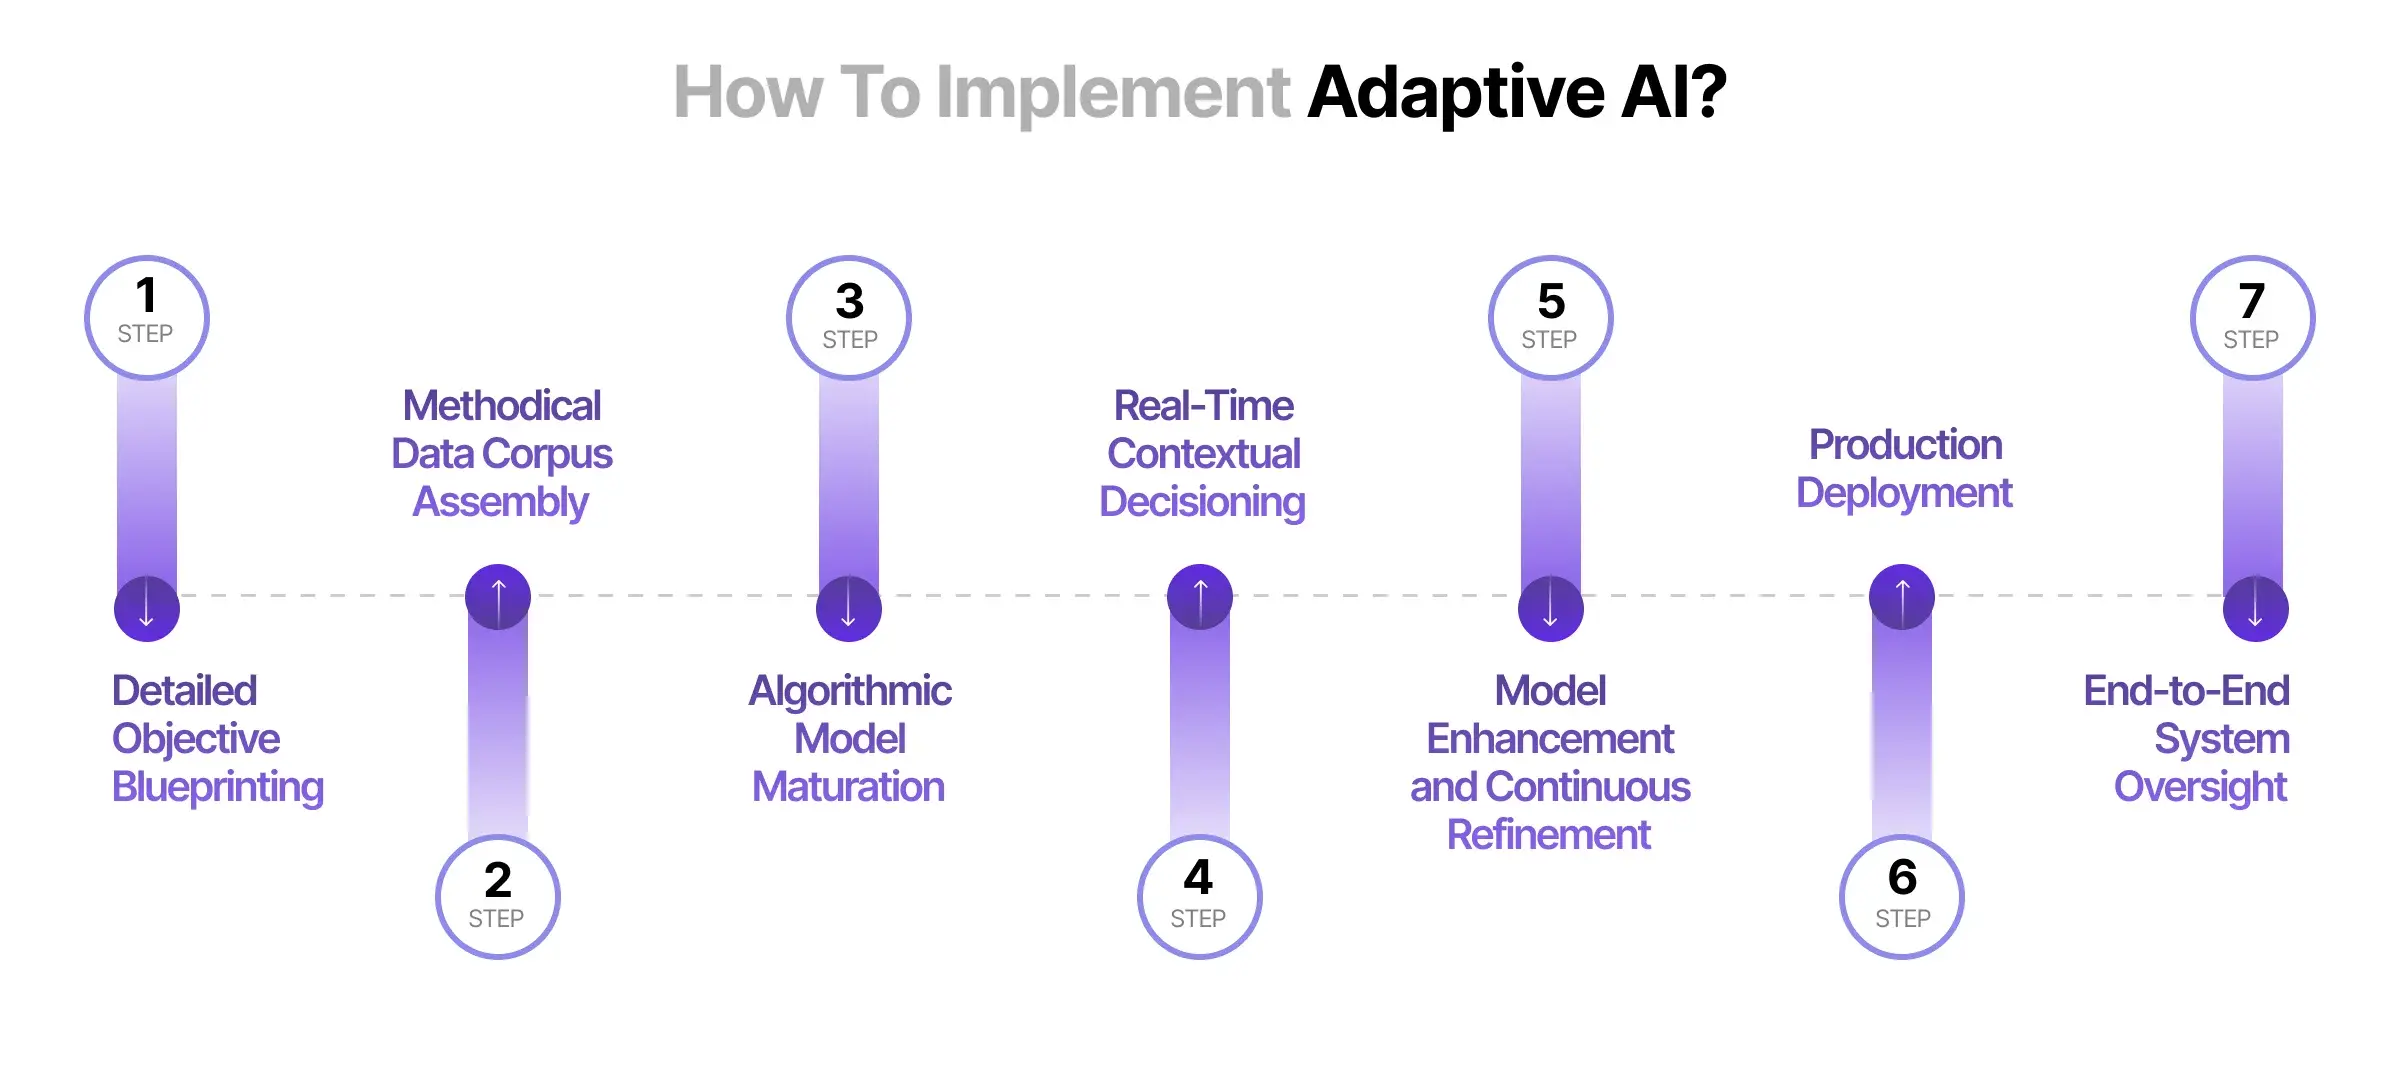 How to implement Adaptive AI?